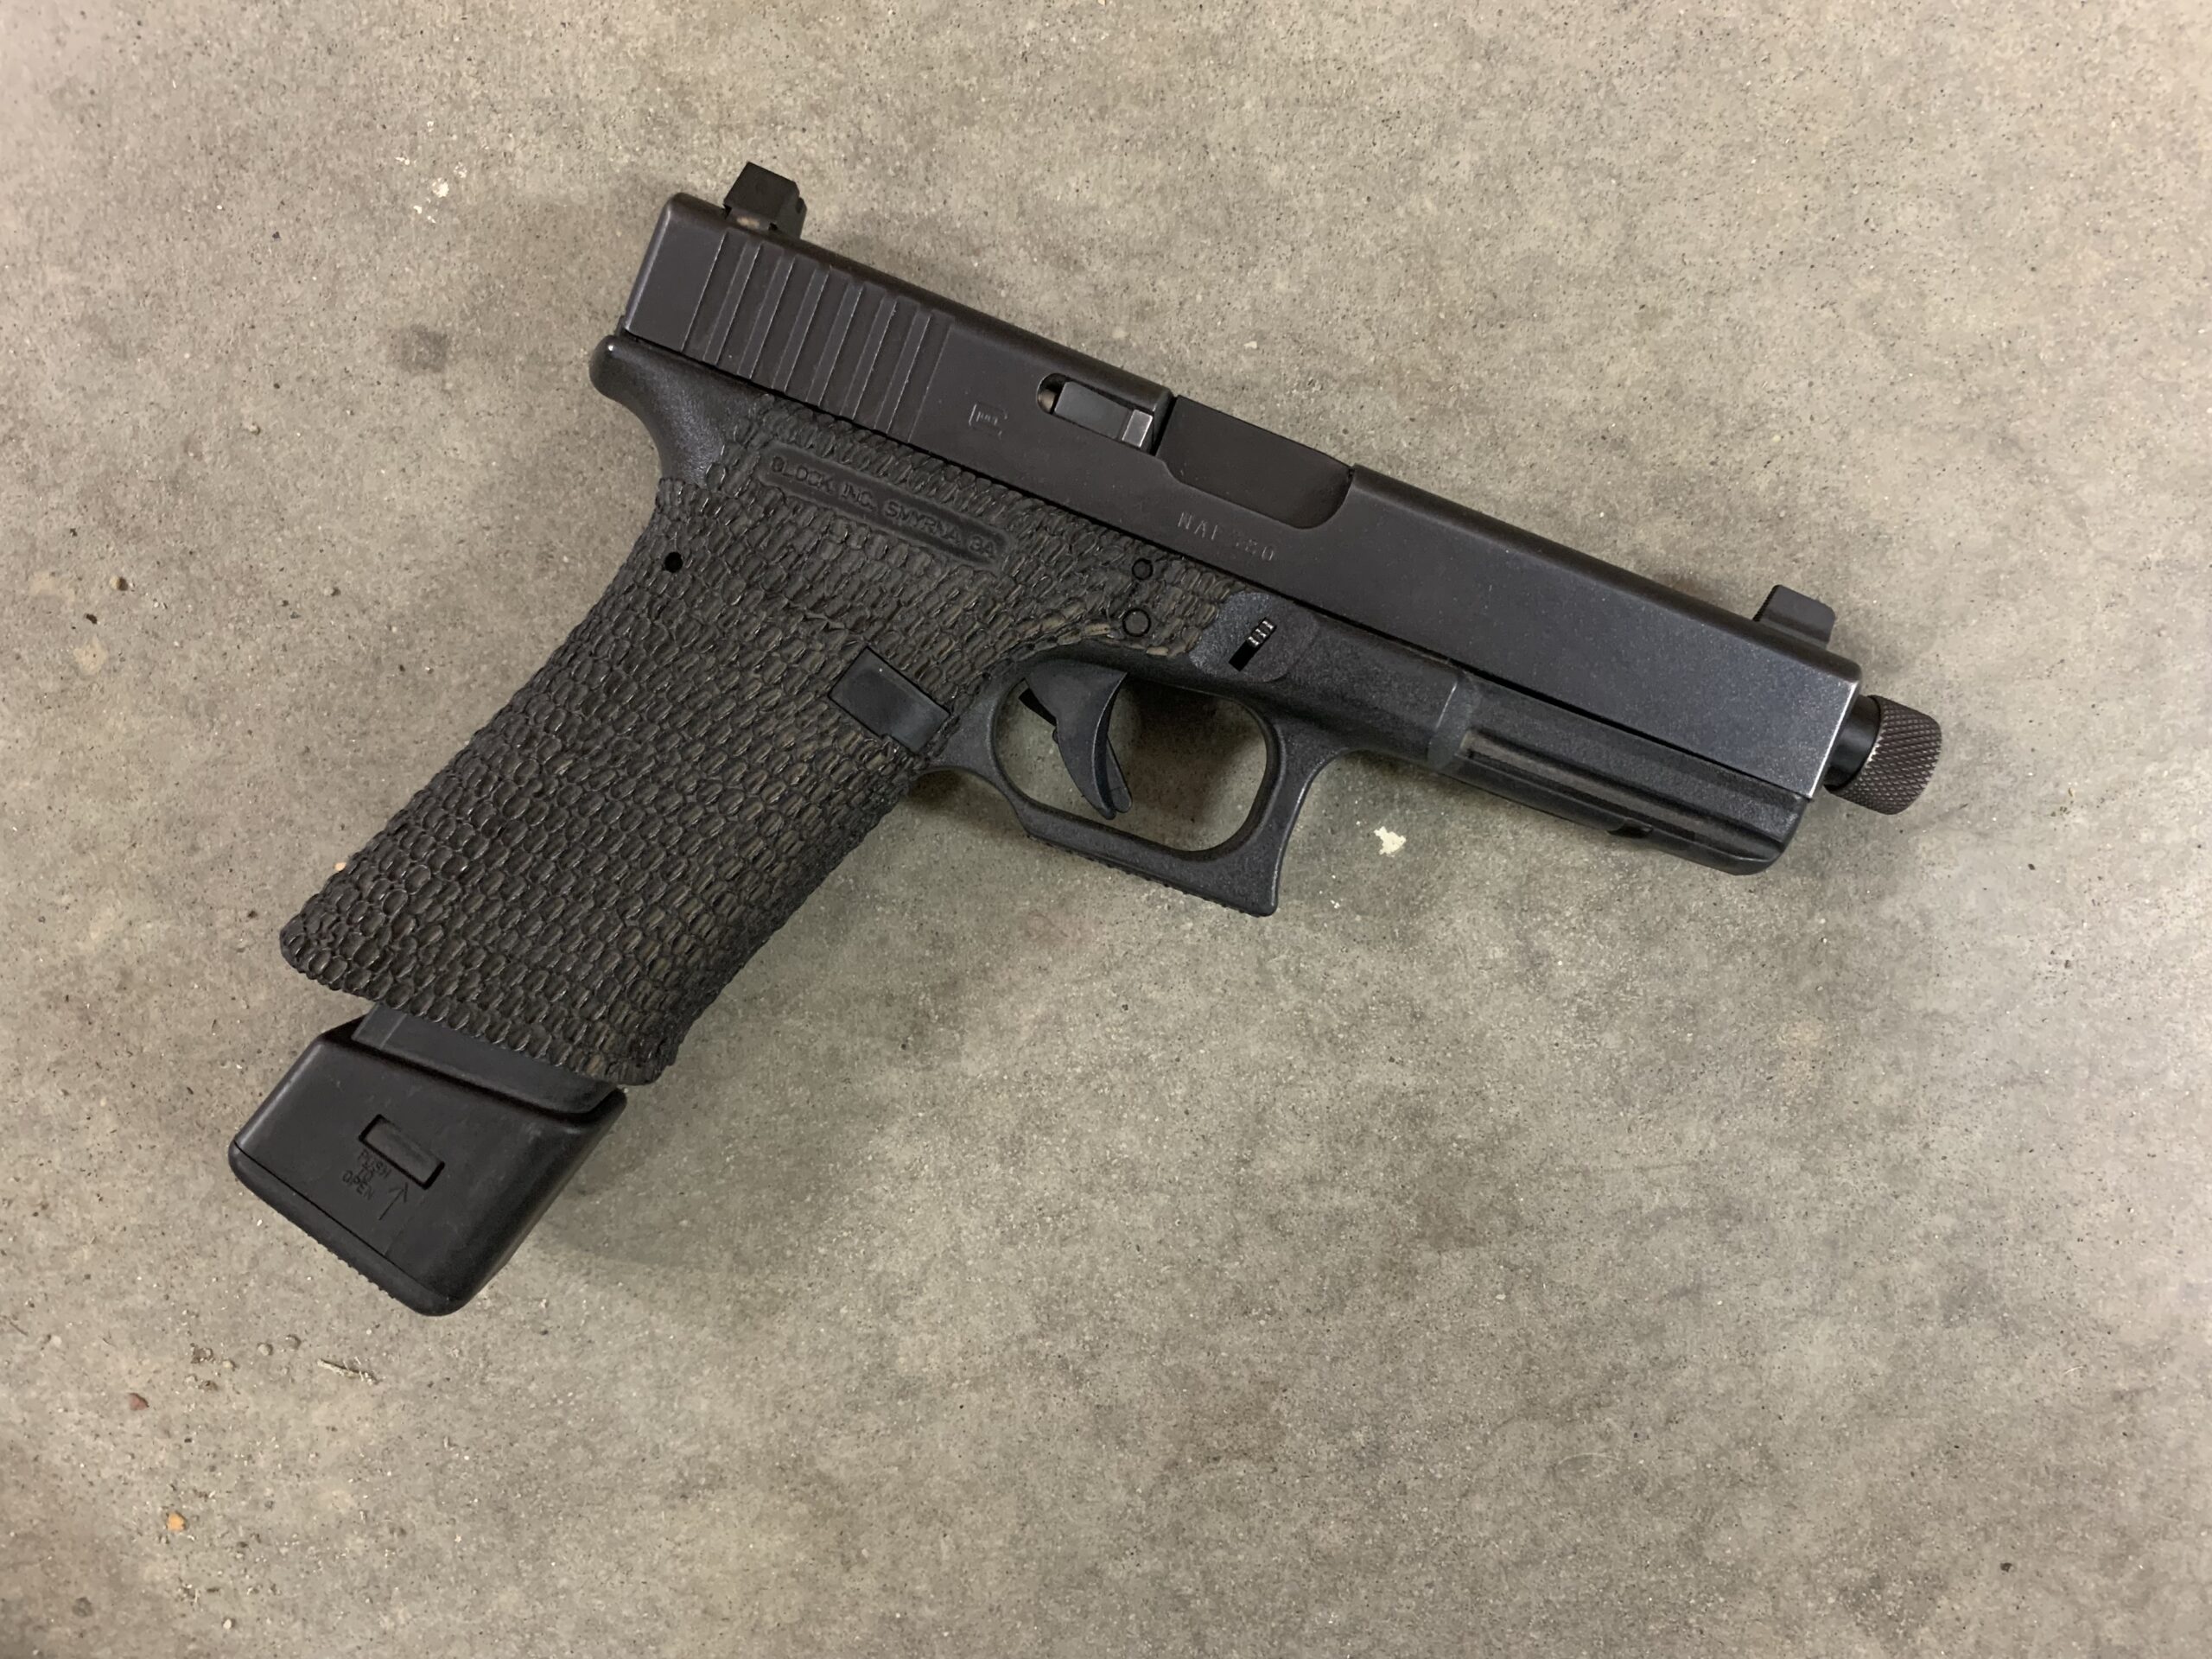 Glock G17 with modified frame, aftermarket barrel, sights, and magazine extention